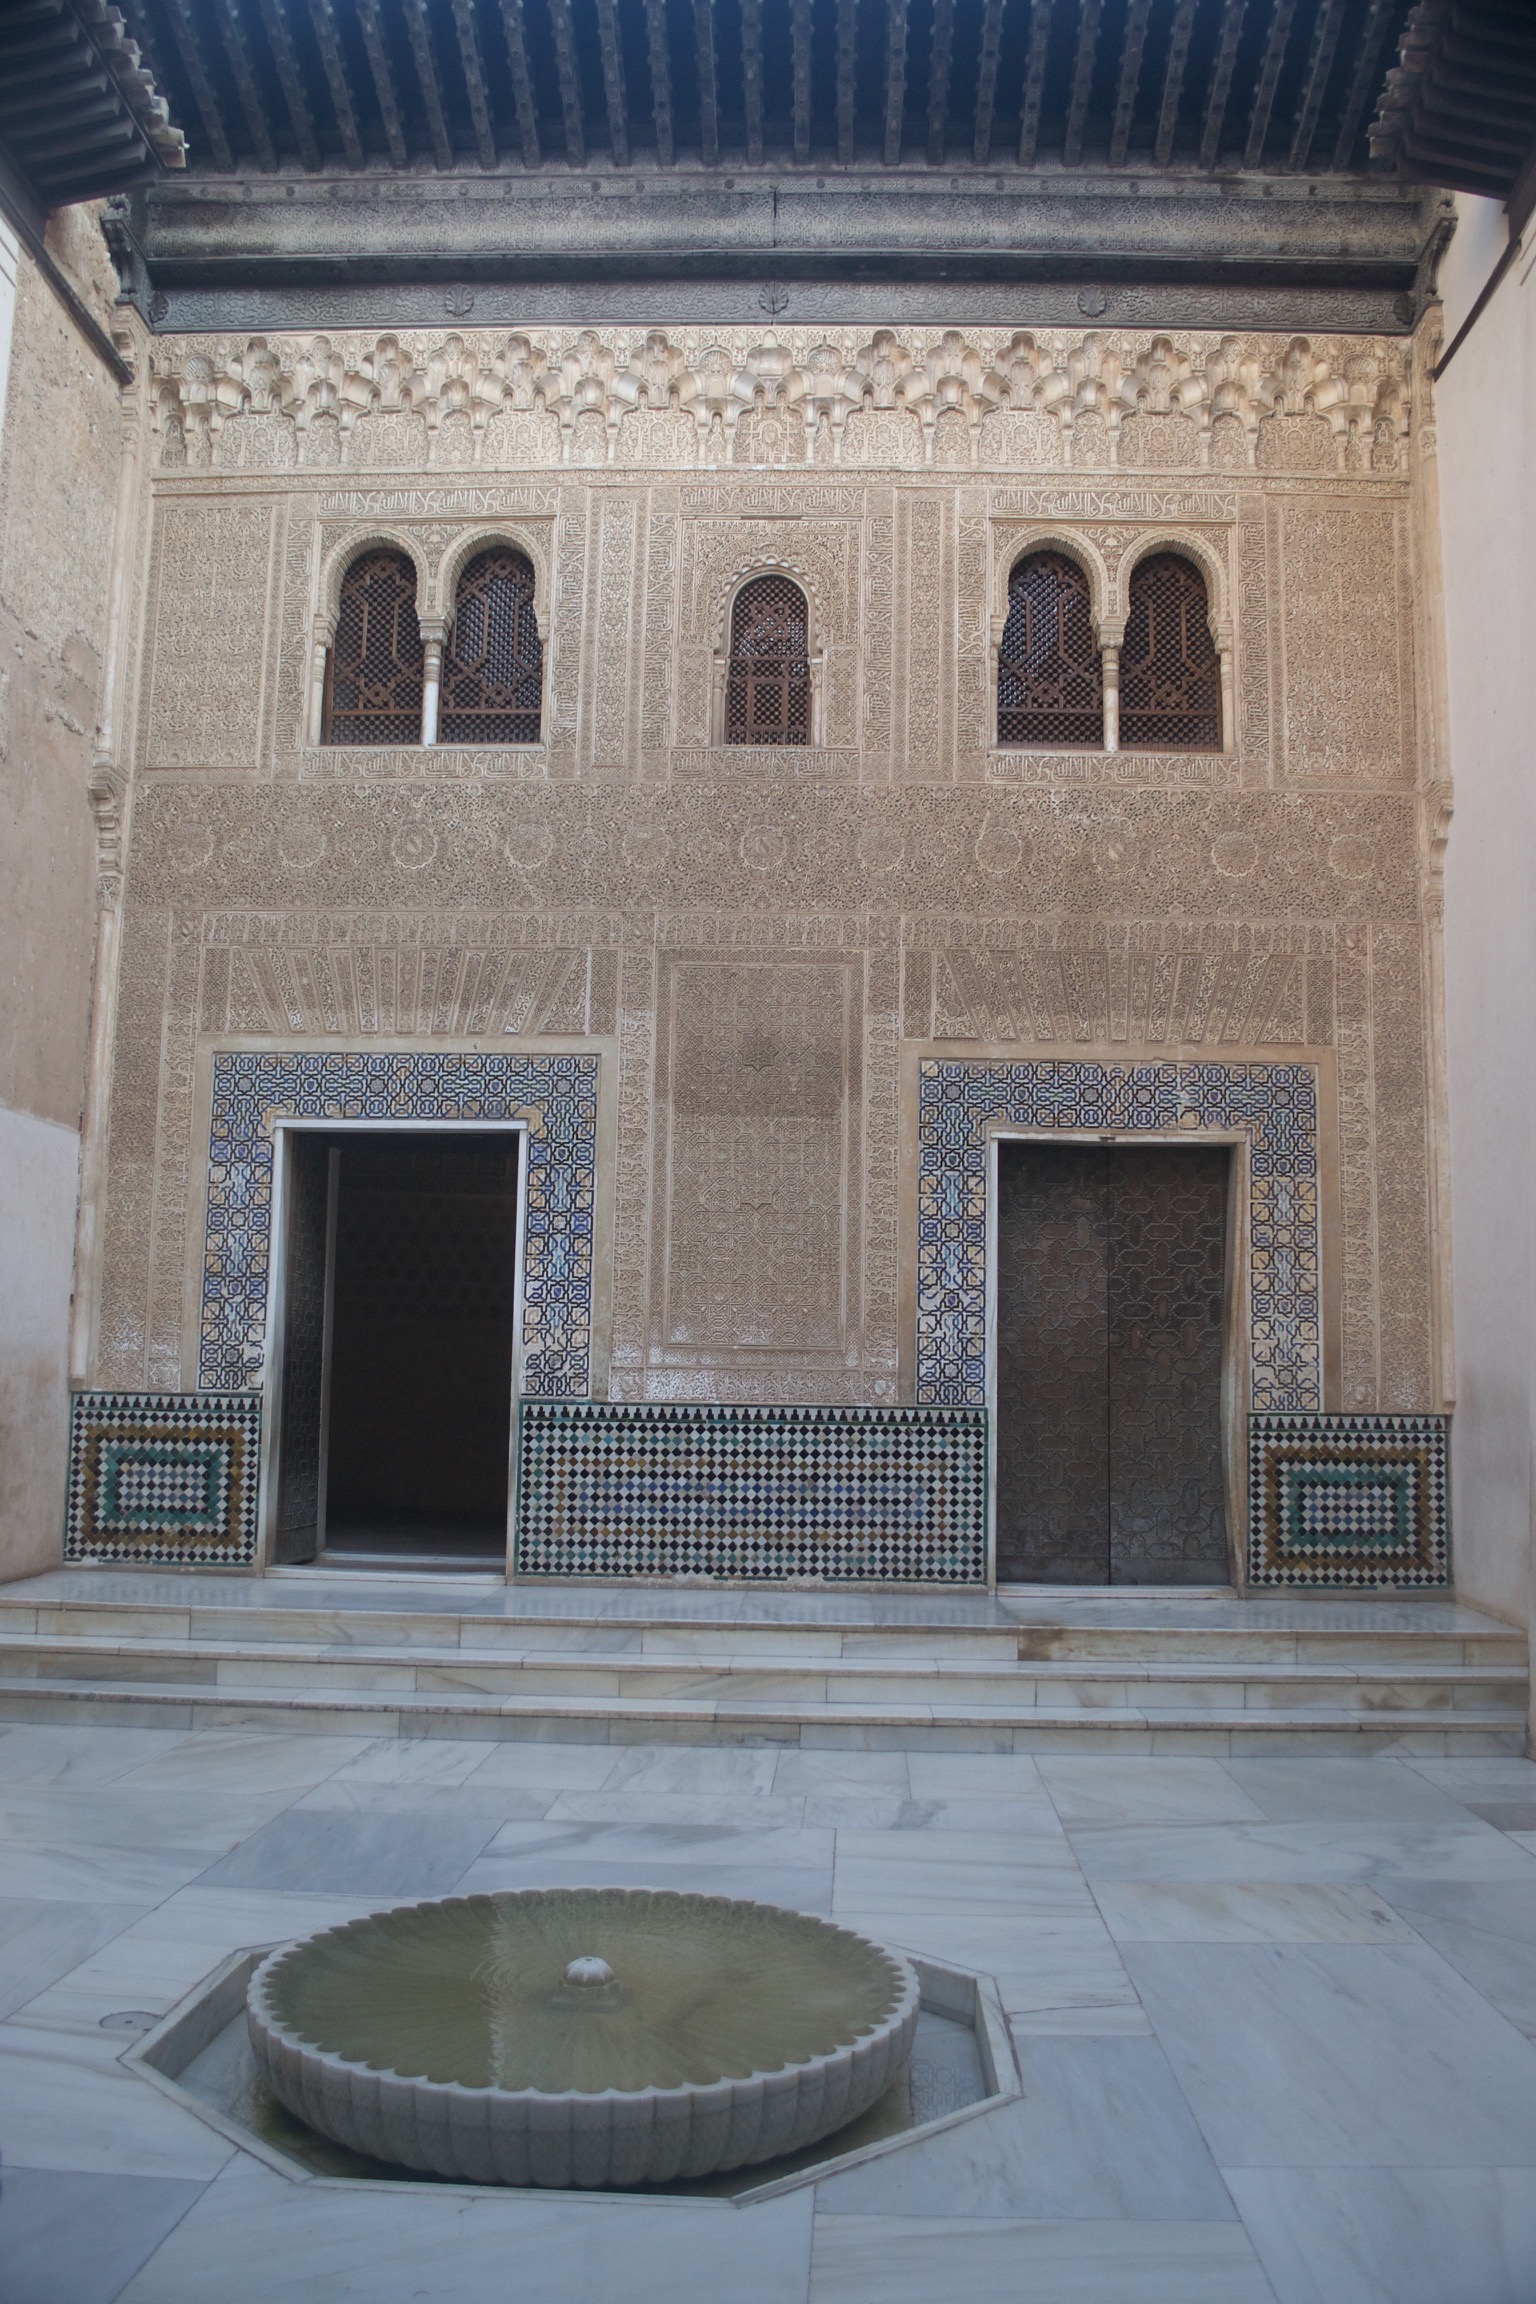 Two doorways are surrounded by mosaics.  The wall is covered with plastered molds or carved engravings.